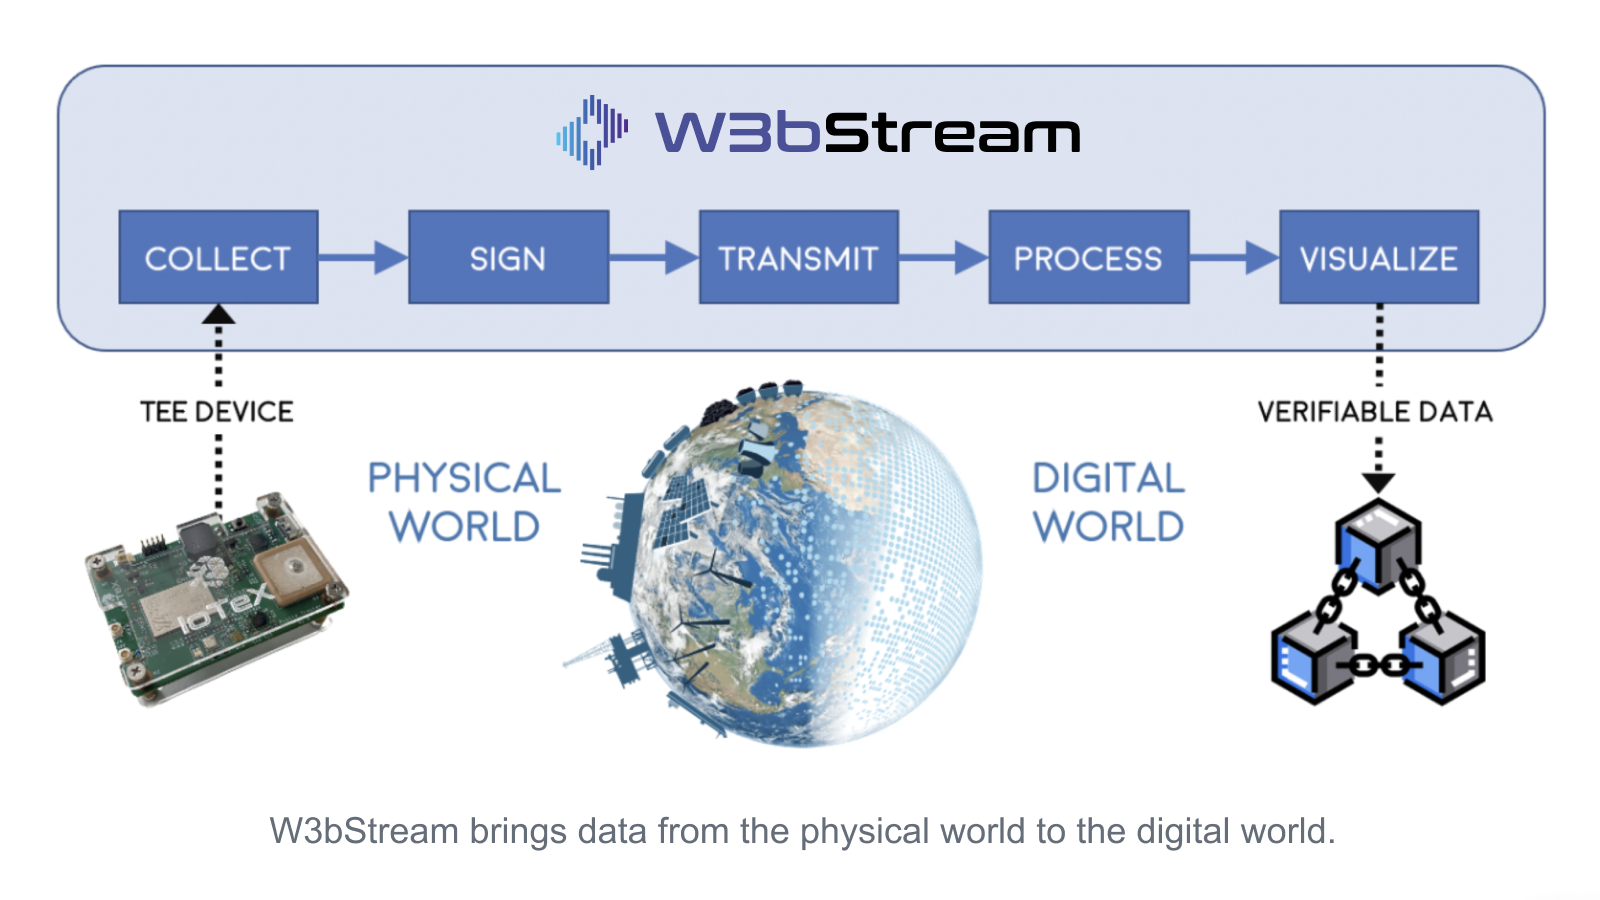 W3bstream illustration of data movement from trusted device, being signed, transmitted, processed and visualized as verifiable data.